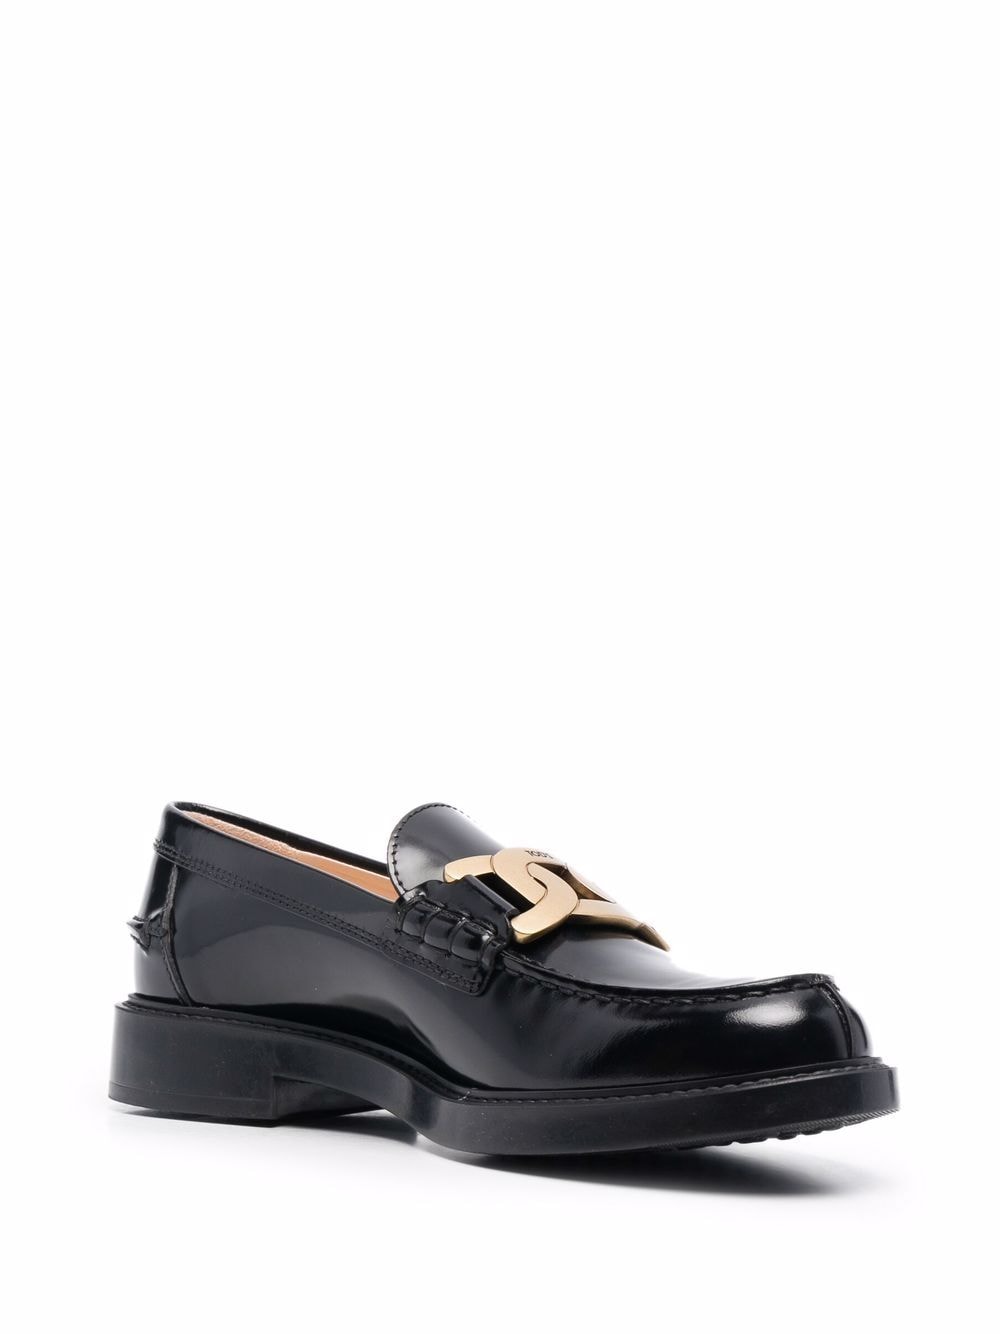 TOD'S Black Leather Chain-Plaque Loafers for Women